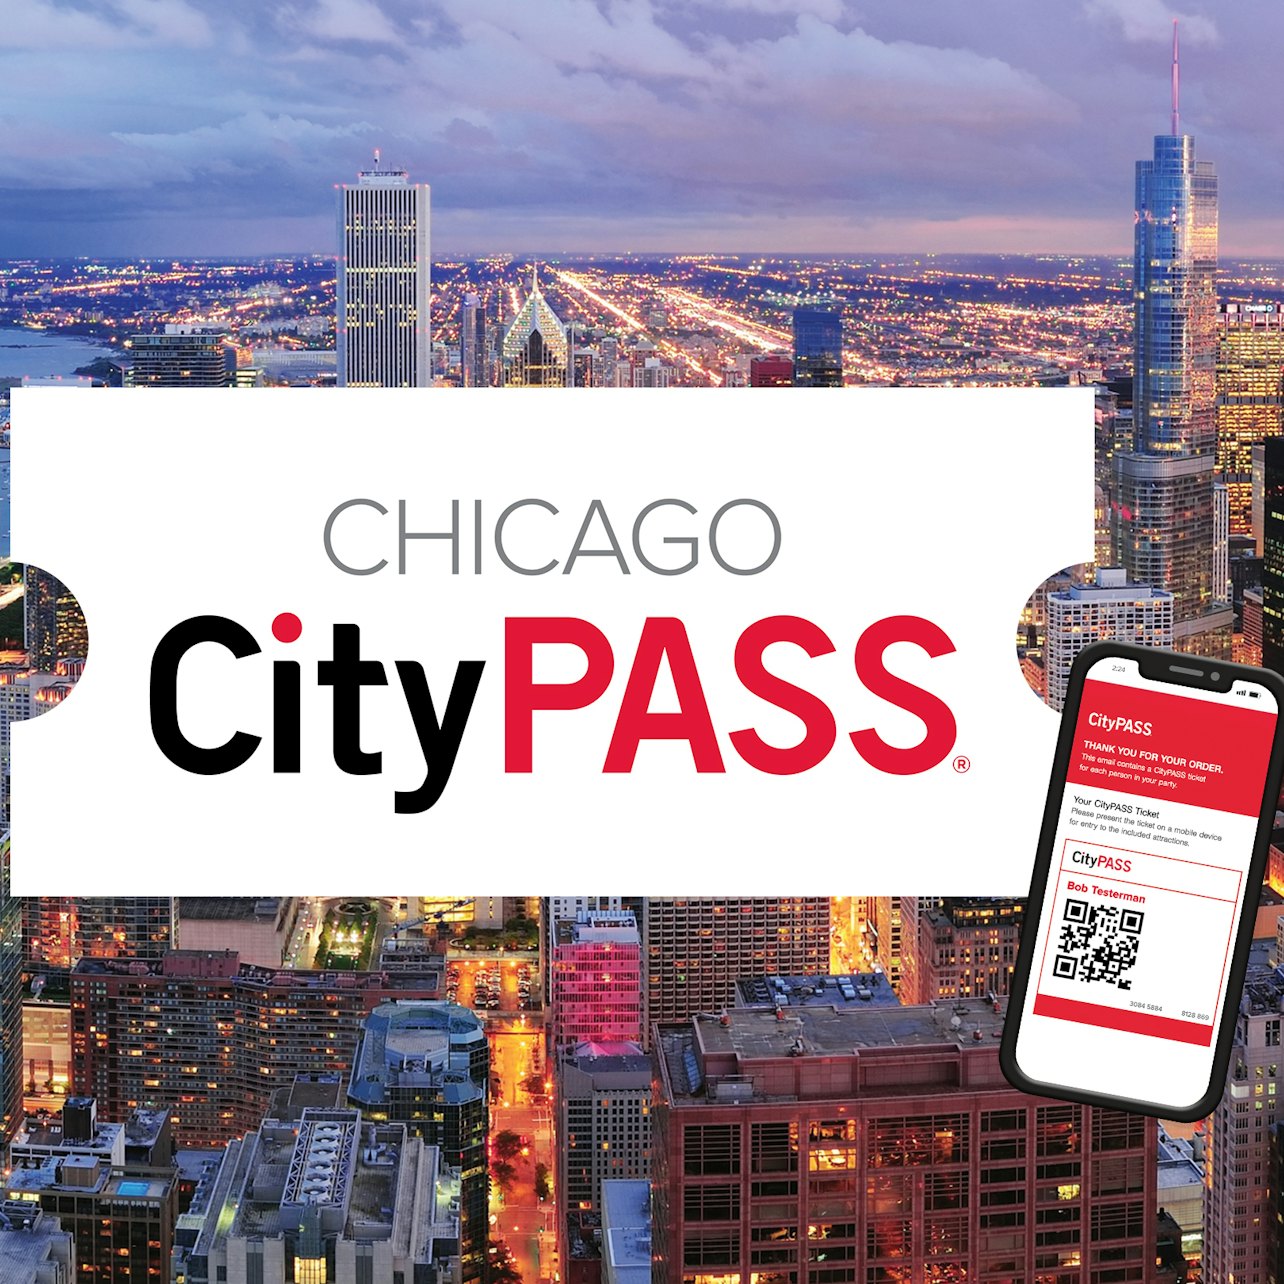 Chicago CityPASS - Accommodations in Chicago